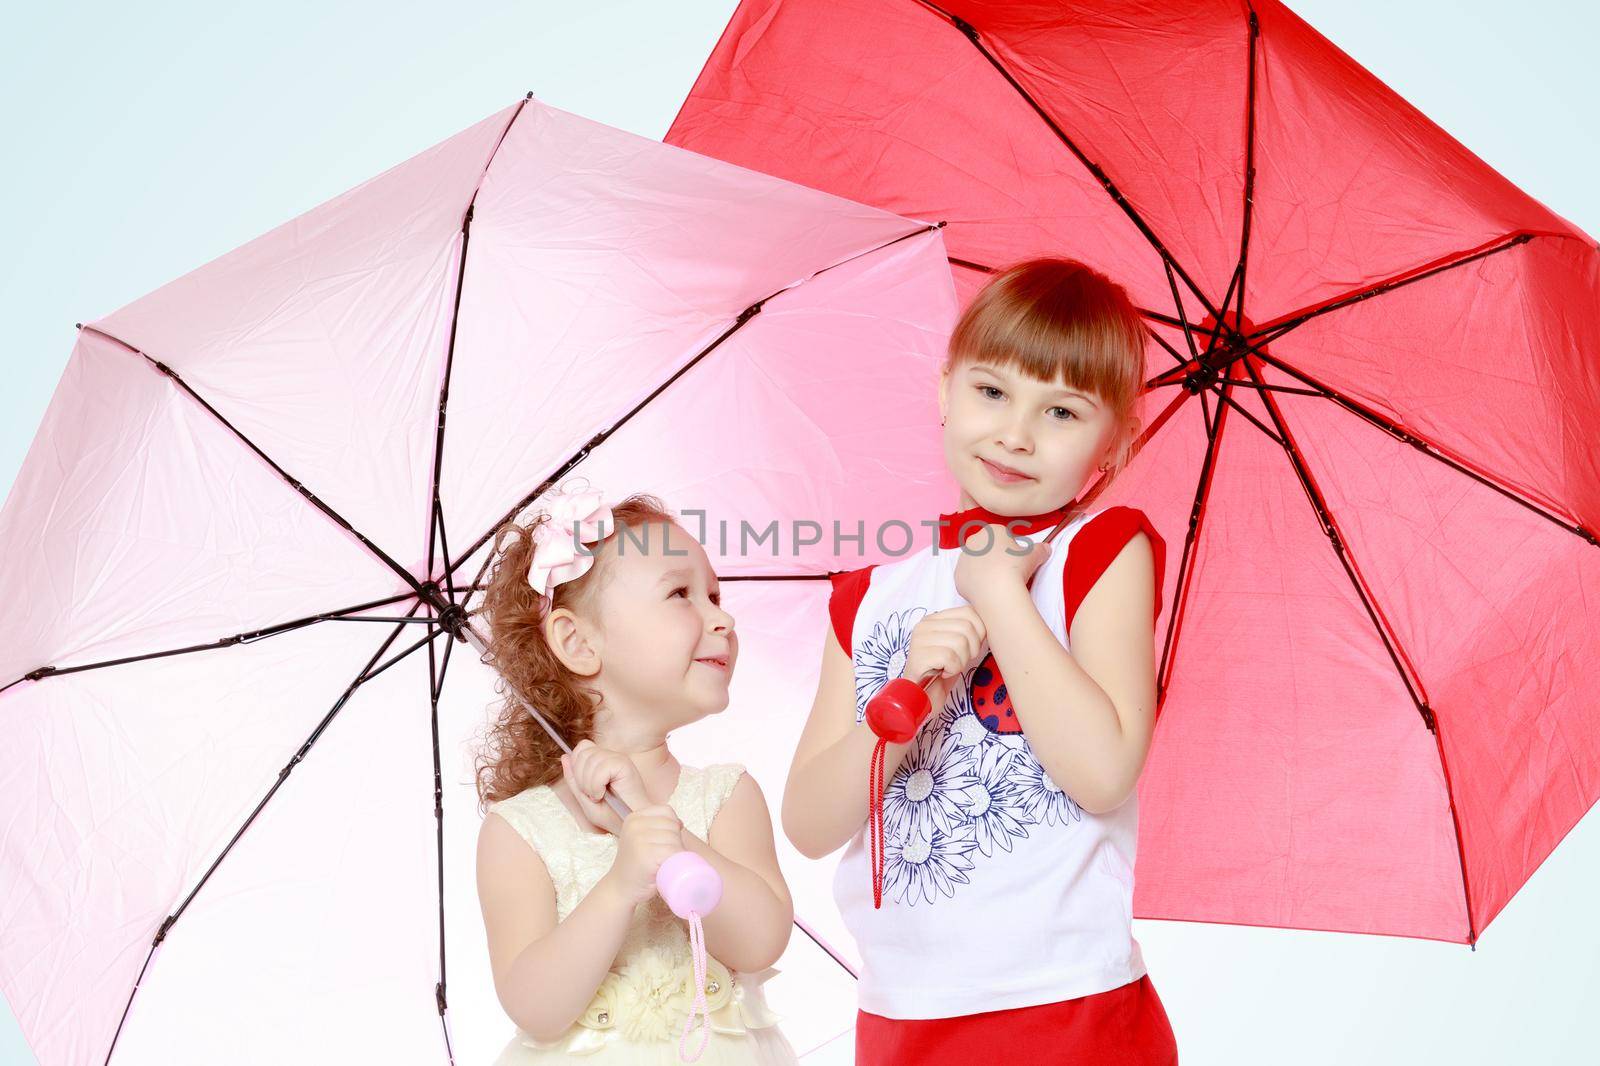 Two charming little girls, little sister and the eldest, sheltered from rain or sun under umbrellas.